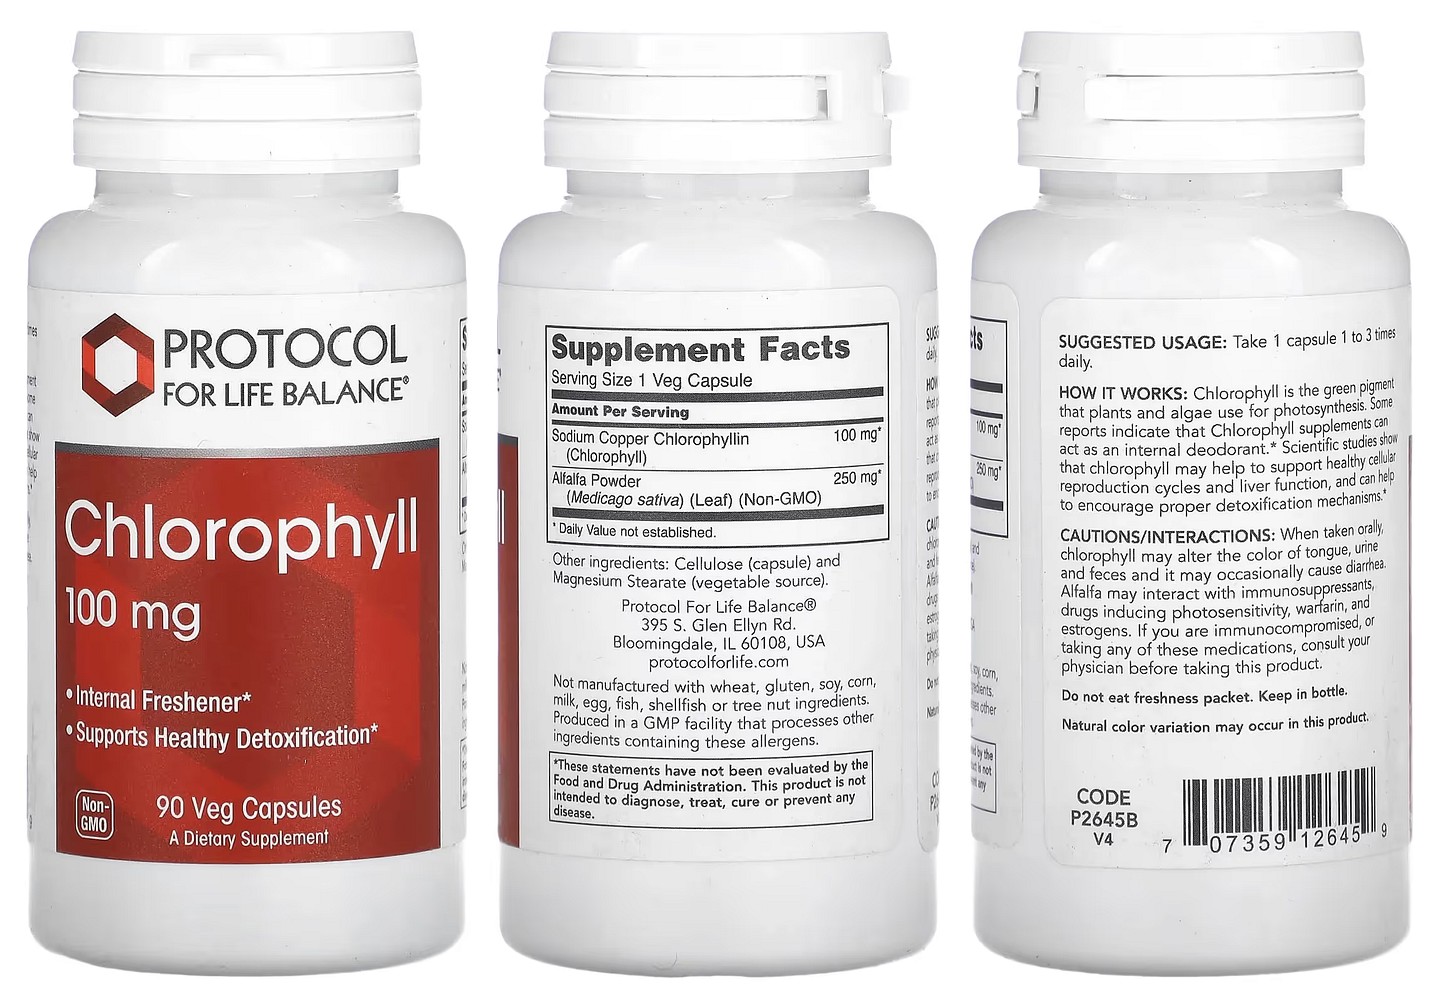 Protocol for Life Balance, Chlorophyll packaging